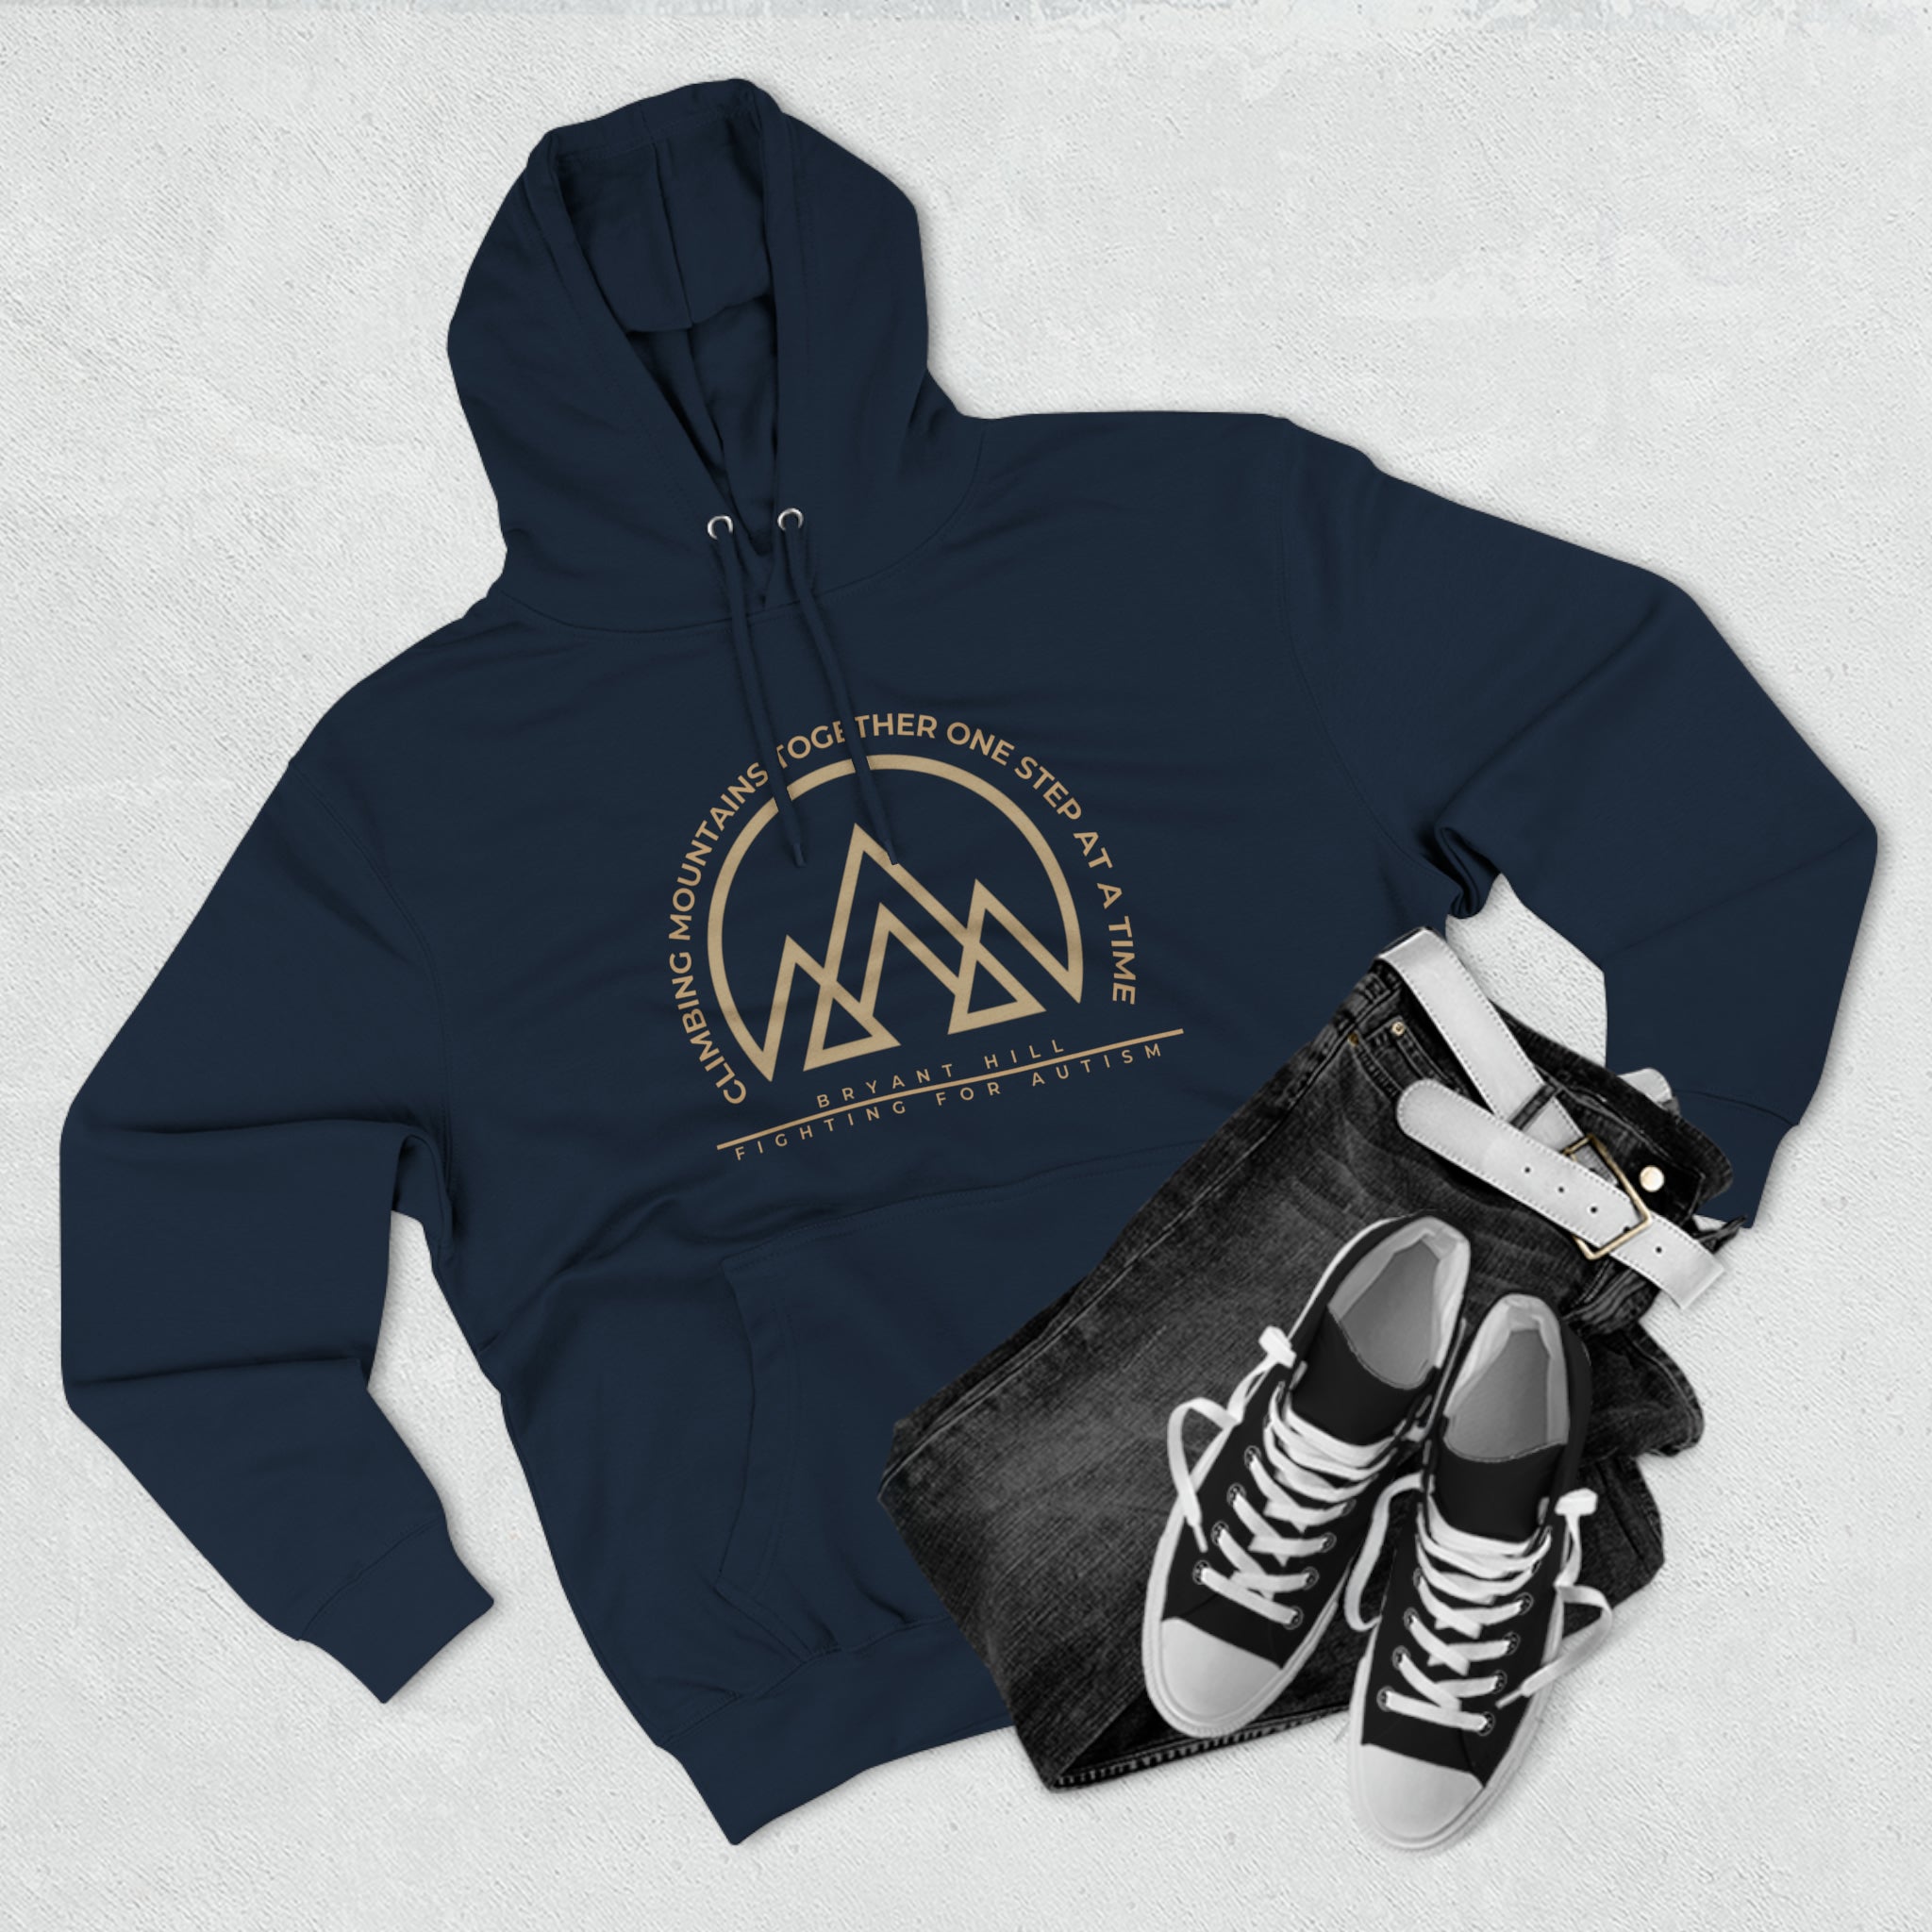 Climbing Mountains Together One Step at a Time Hoodie